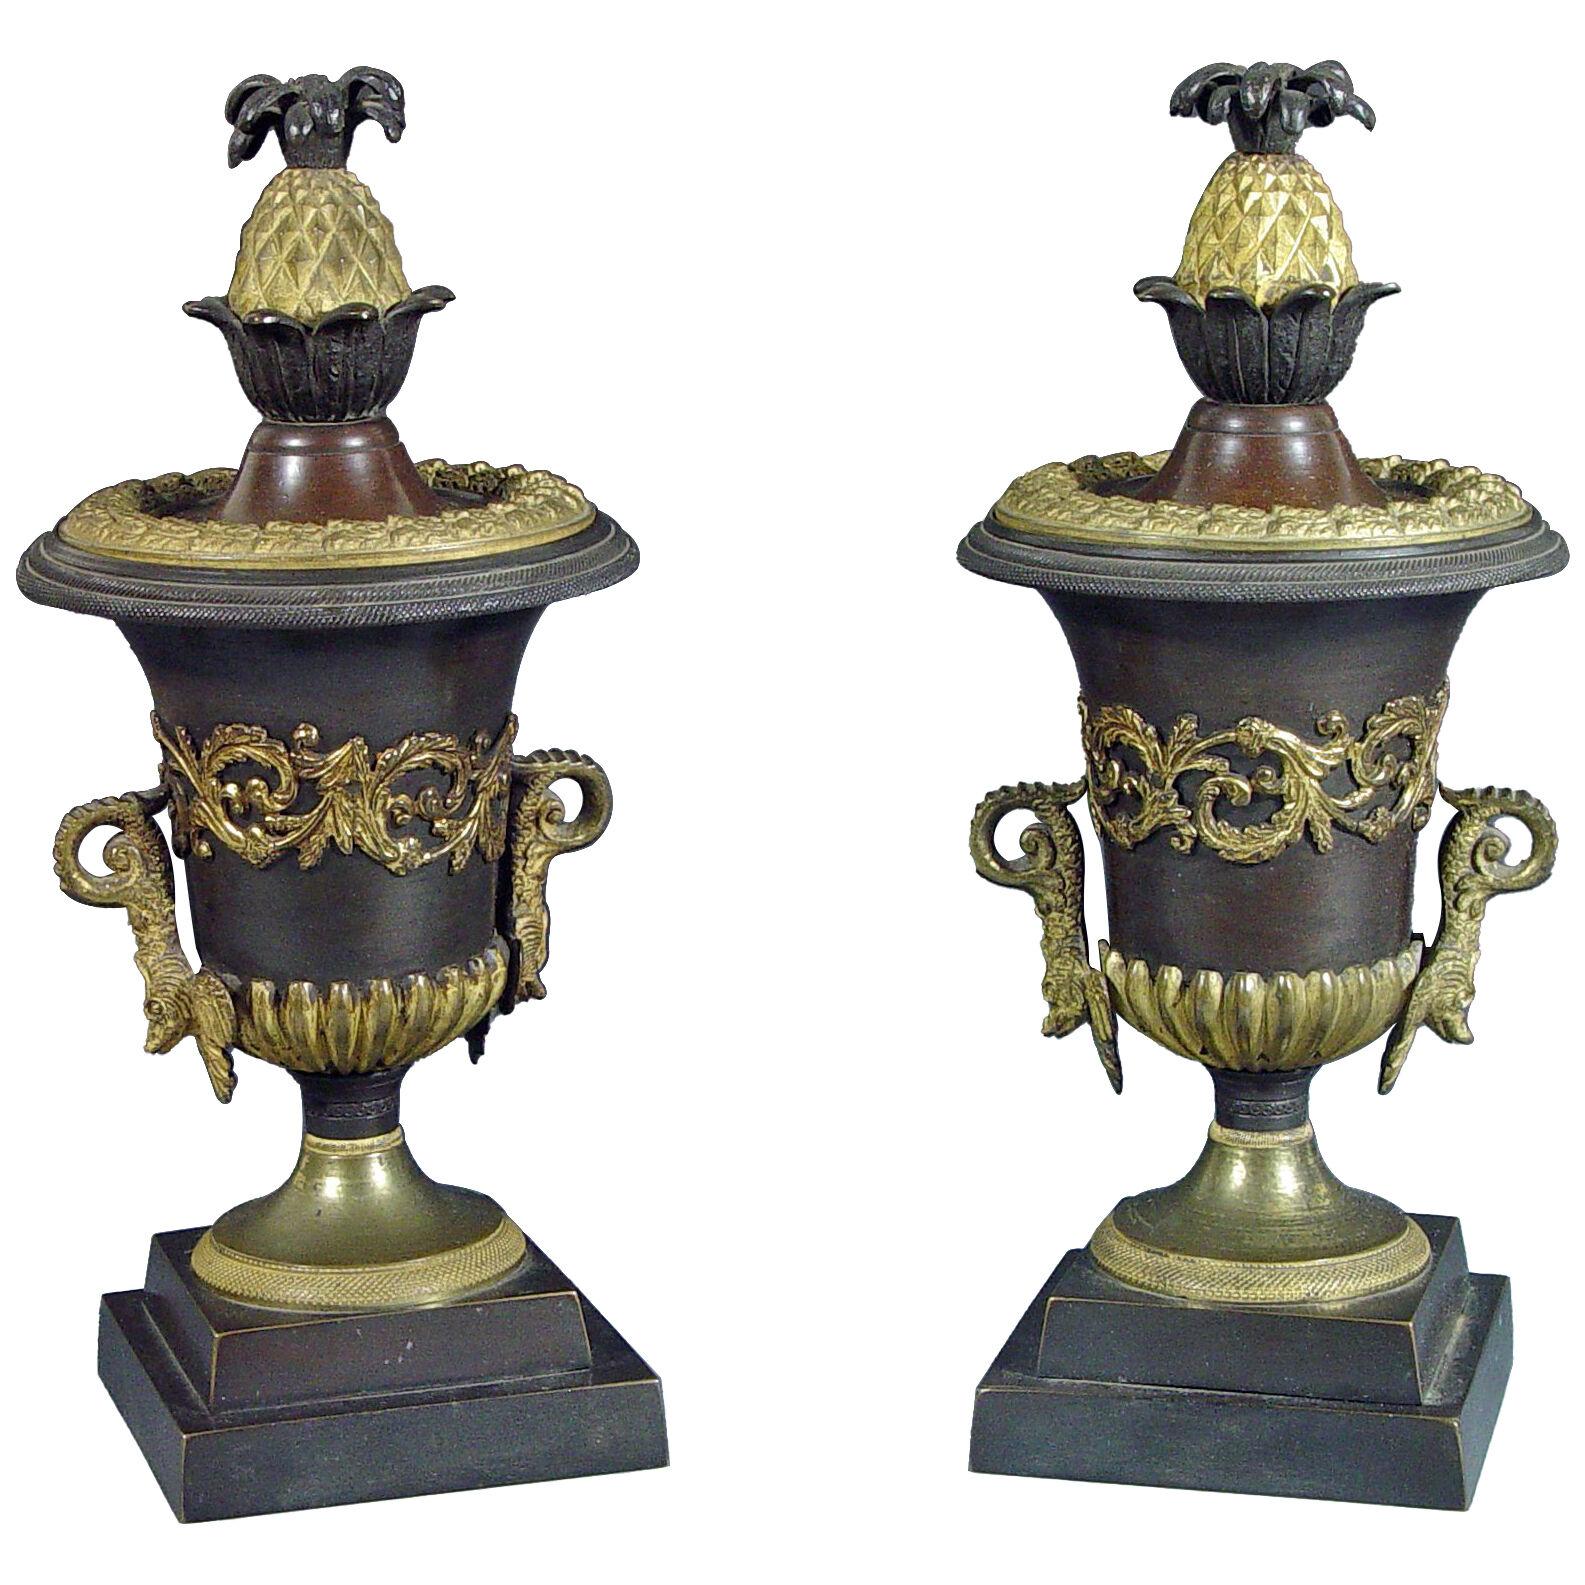 Regency Bronze & Ormolu Pineapple topped Urns with Reversible Candlestick